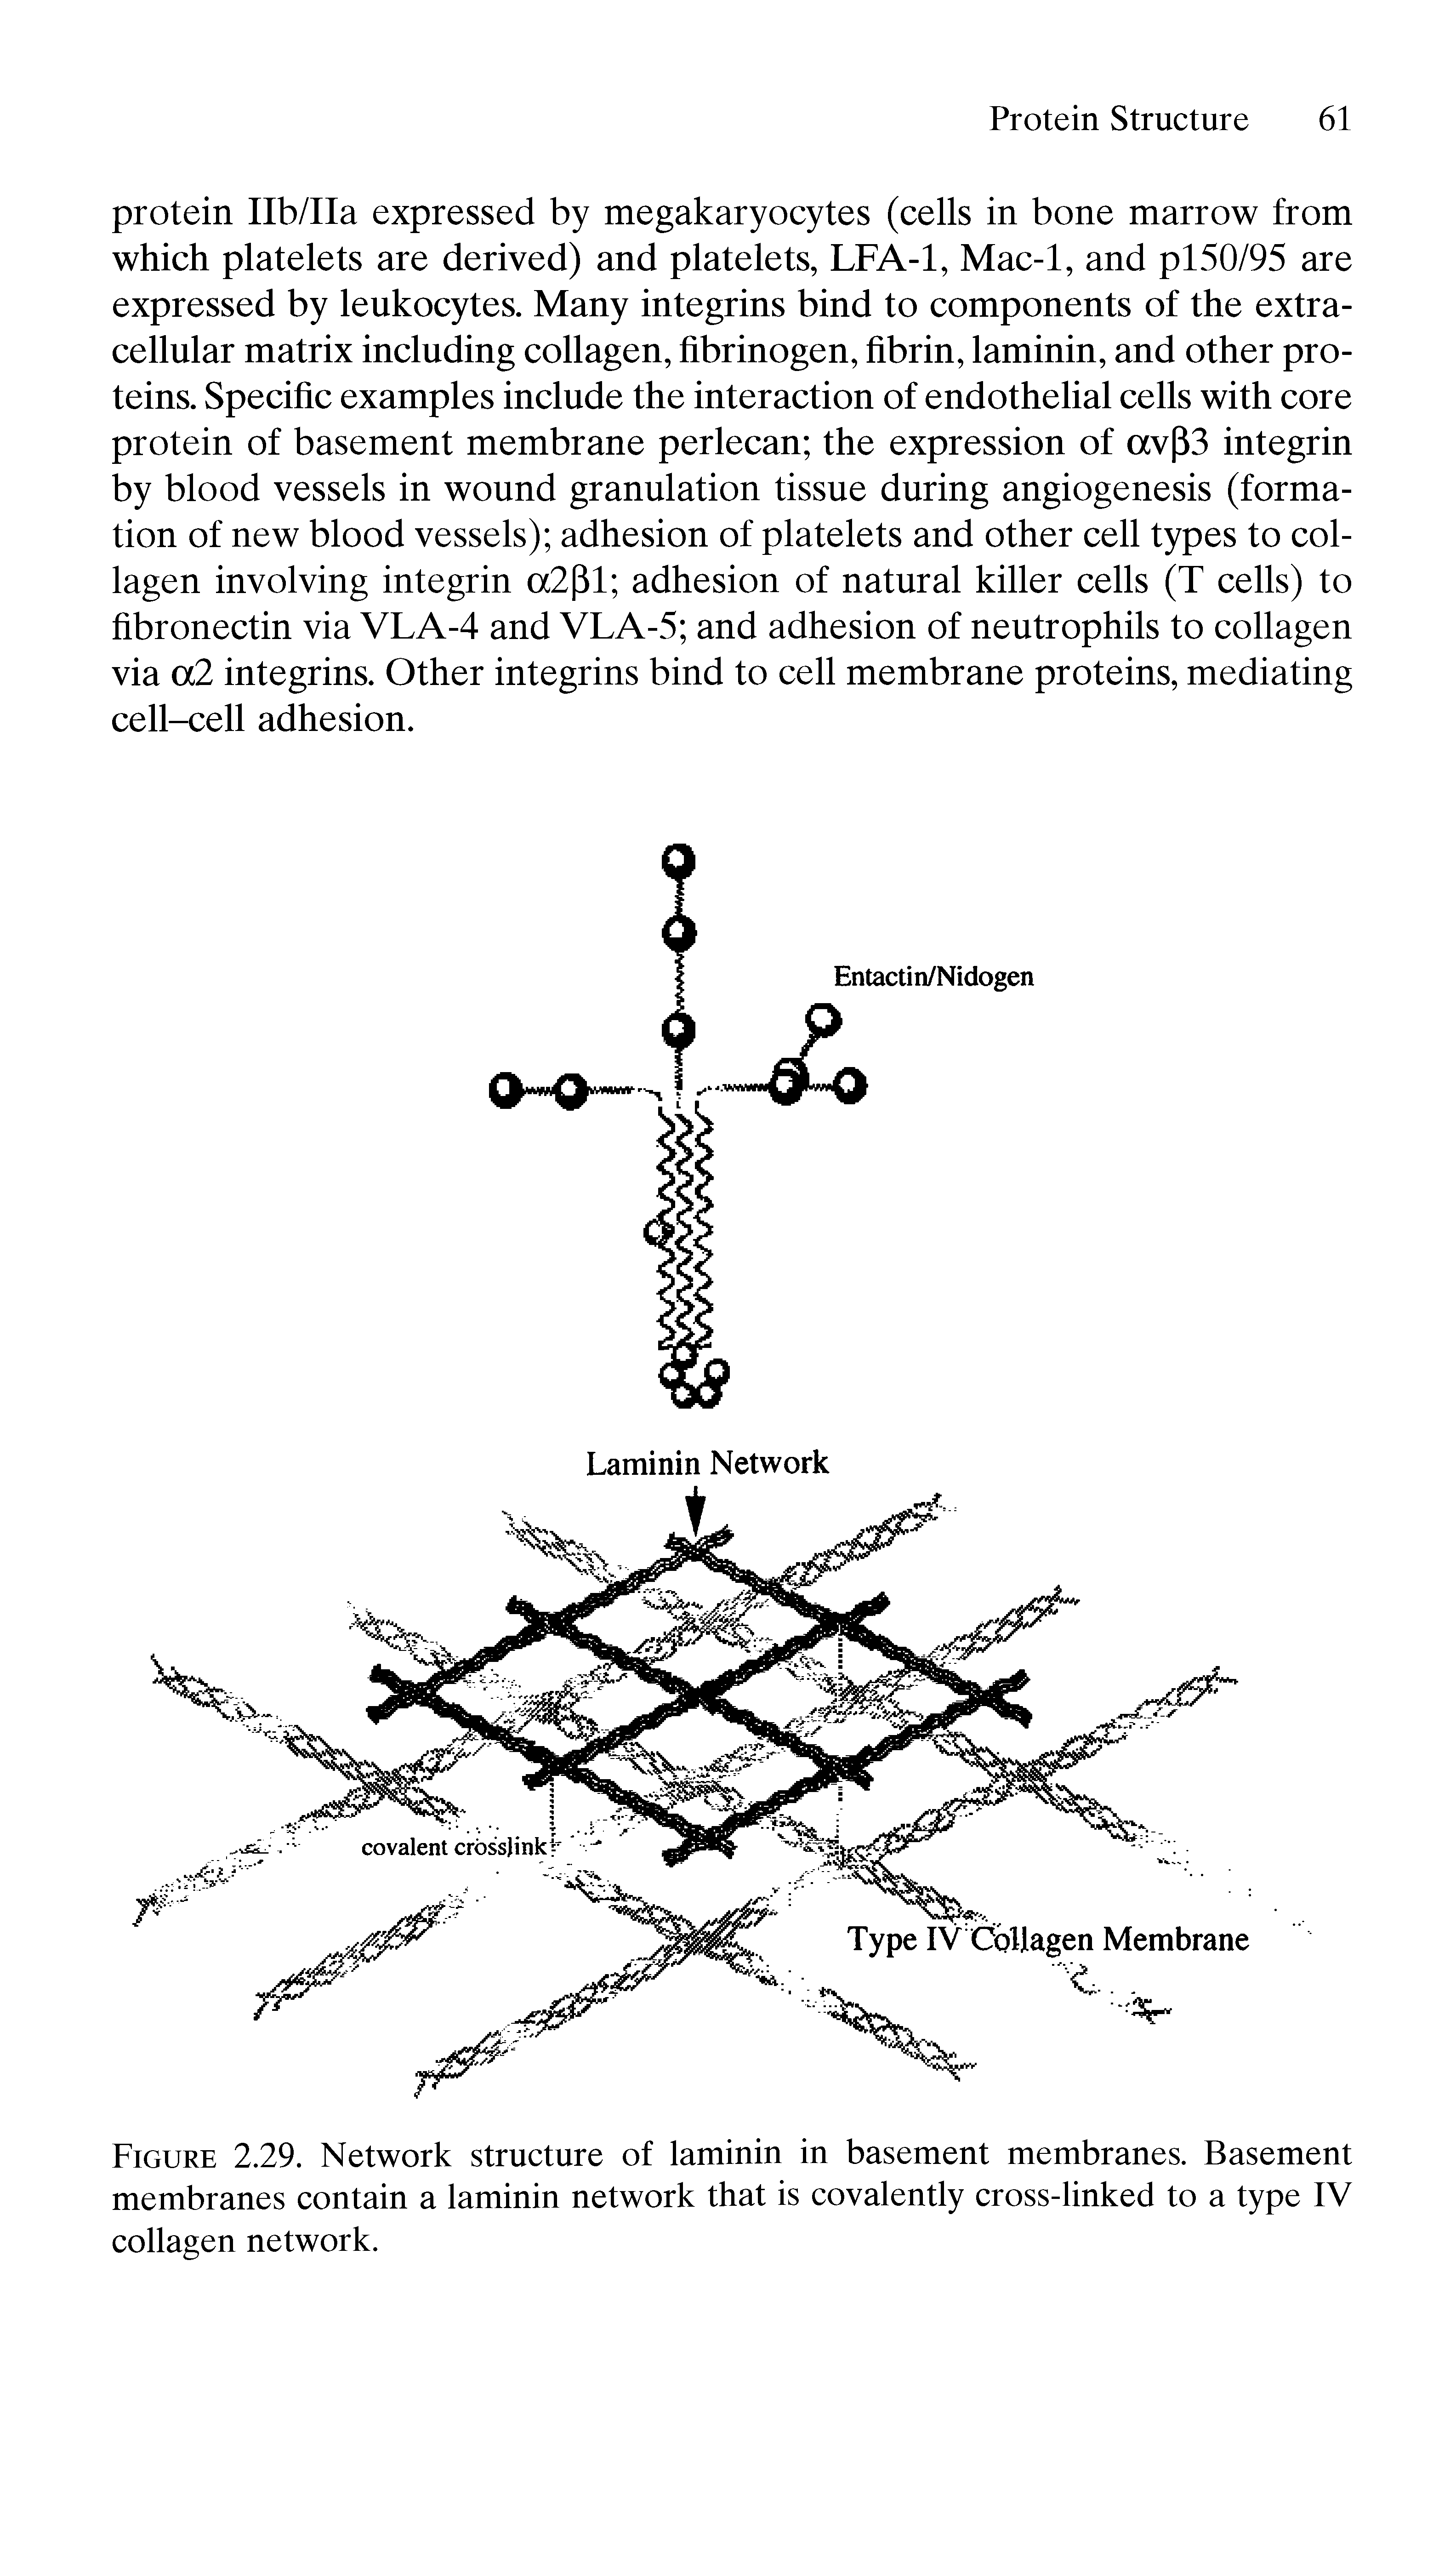 Figure 2.29. Network structure of laminin in basement membranes. Basement membranes contain a laminin network that is covalently cross-linked to a type IV collagen network.